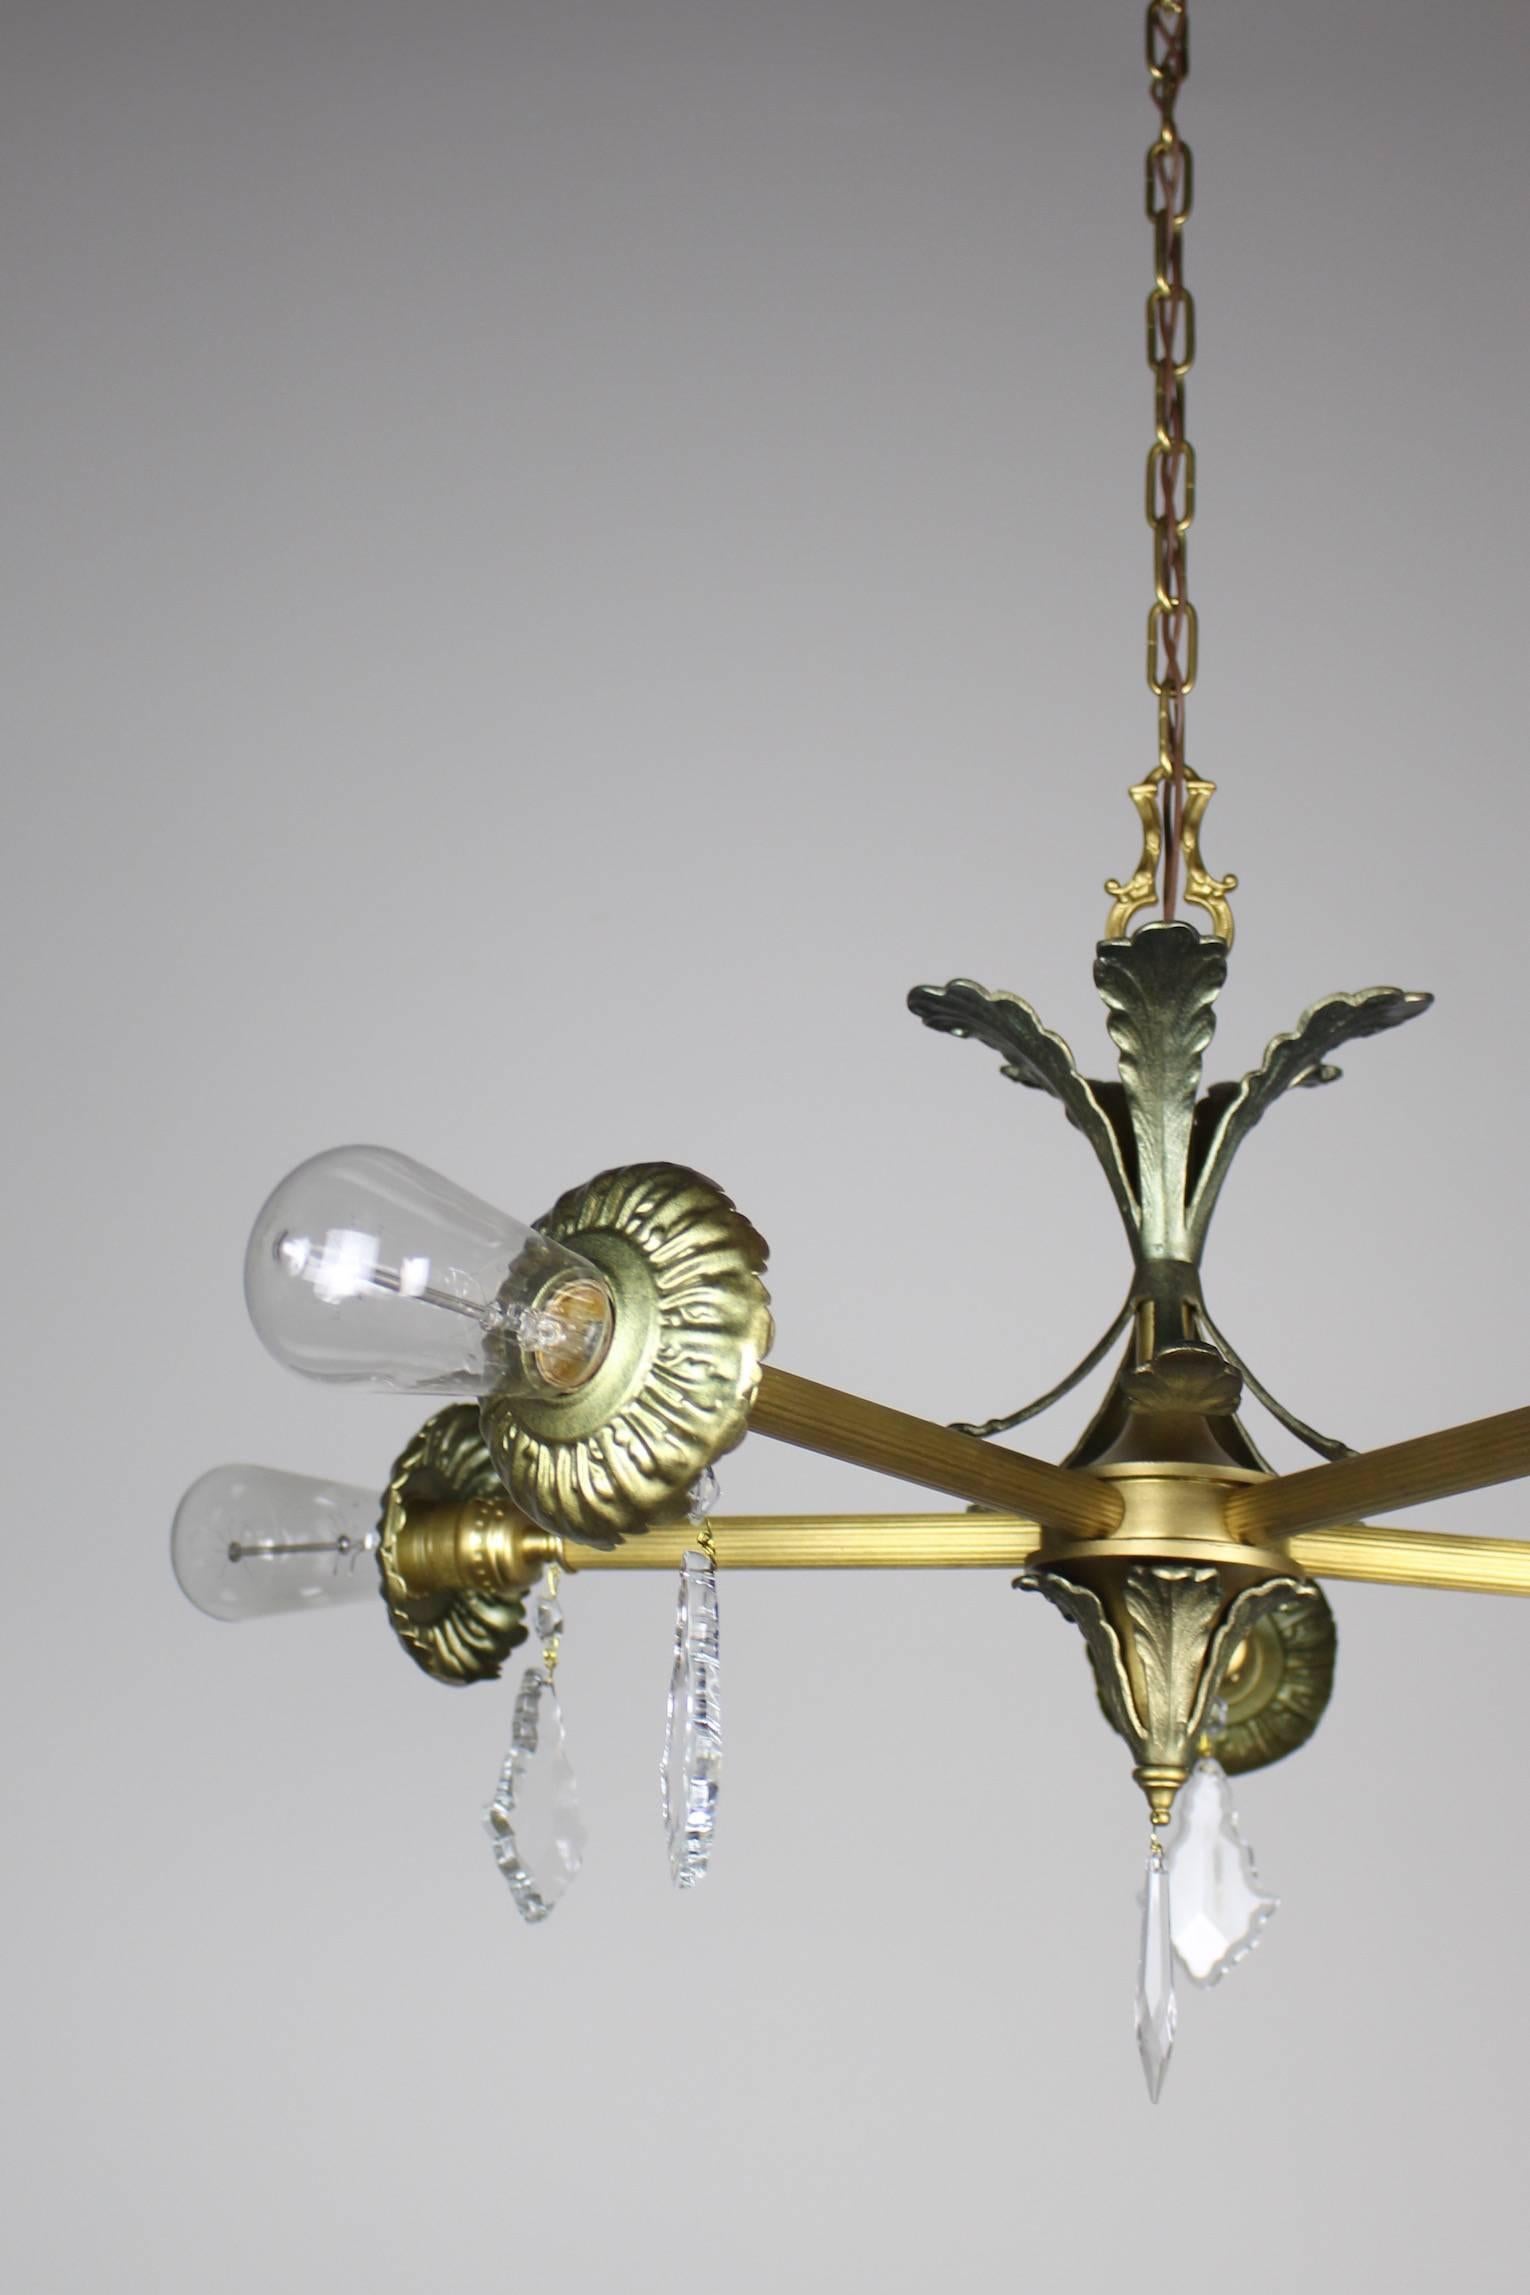 Industrial Steampunk inspired fixture. Five arms, each bearing an Edison bulb - fitted with violin crystals. SKU DF1252 Measurements: 42" L x 30" D,
(28" Min. length).

 